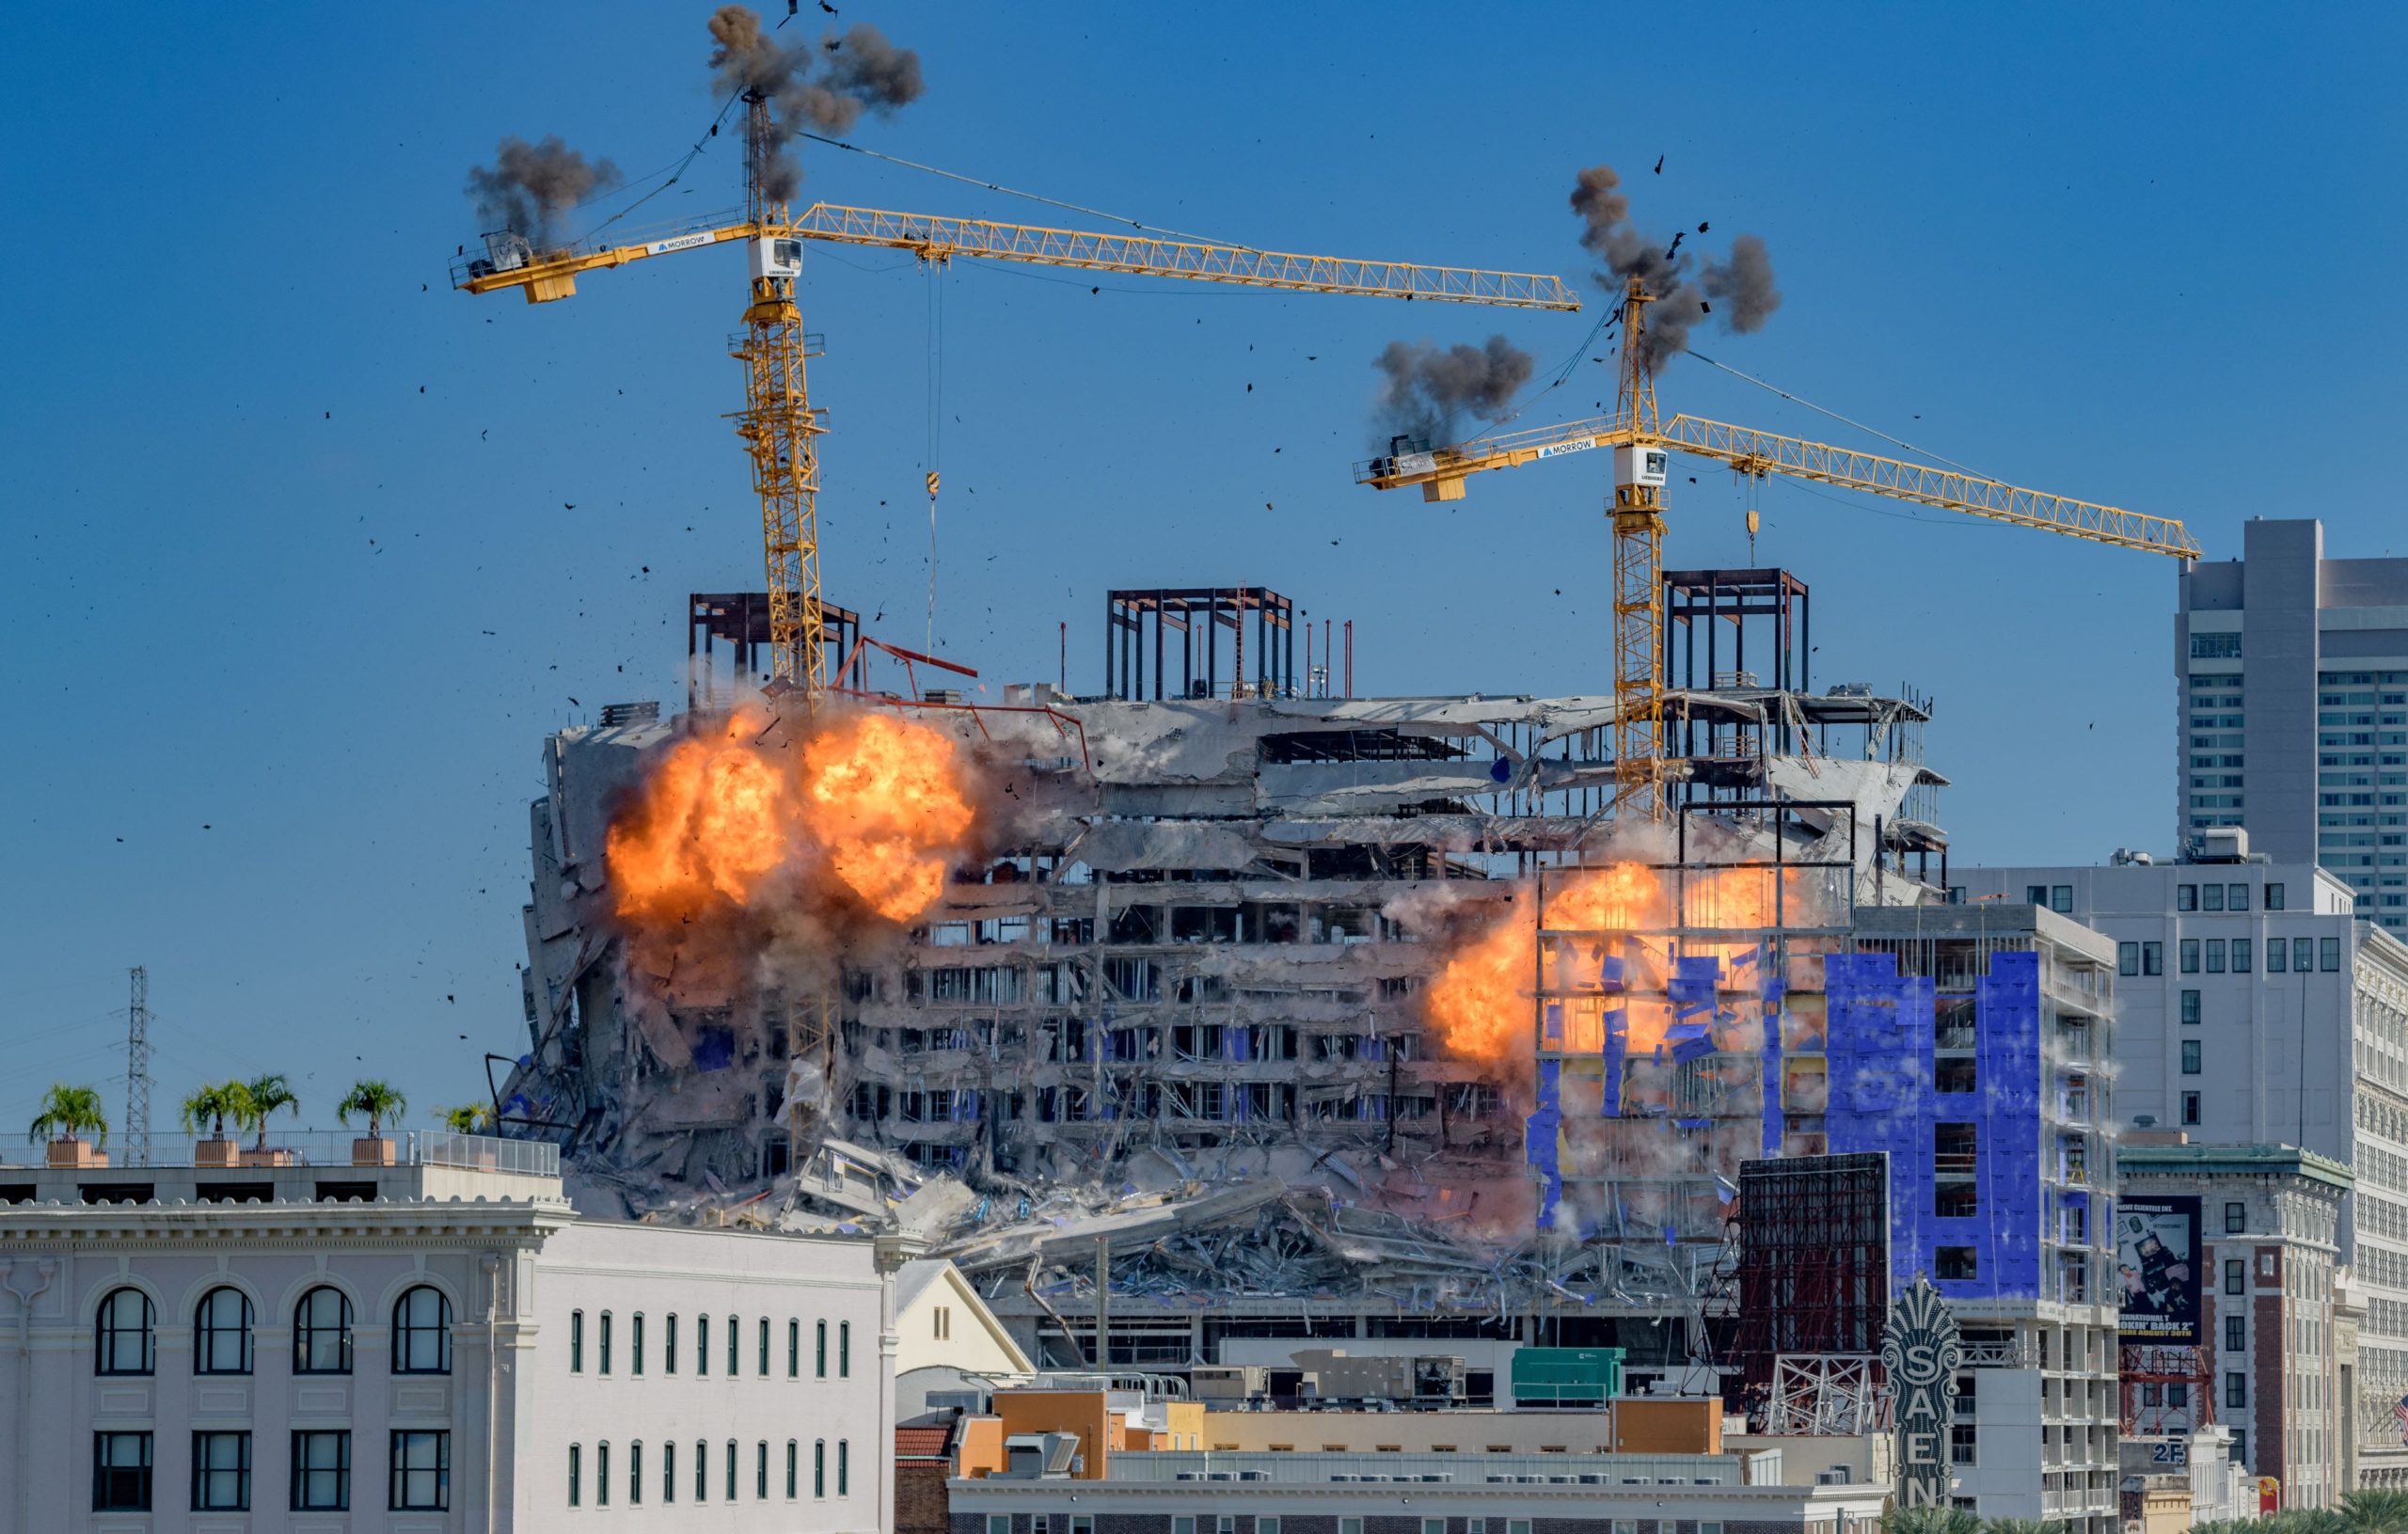 Two cranes begin to come down after a demolition implosion at the Hard Rock Hotel collapse site in New Orleans Sunday October 20, 2019. Three people died and at least 20 were injured in the initial collapse on Saturday October 12th. No one was injured Sunday when the demolition caused one of the two cranes to land in the street below. A sewer line was damaged but the buried gas and electrical lines were not damaged according to city officials. The historical Saenger Theatre did not sustain major damage at the crane collapse with the crane just missing the theater. The crane was already leaning after the initial collapse and would have likely fallen down in the next few days without a planned demolition. Photo by Matthew Hinton